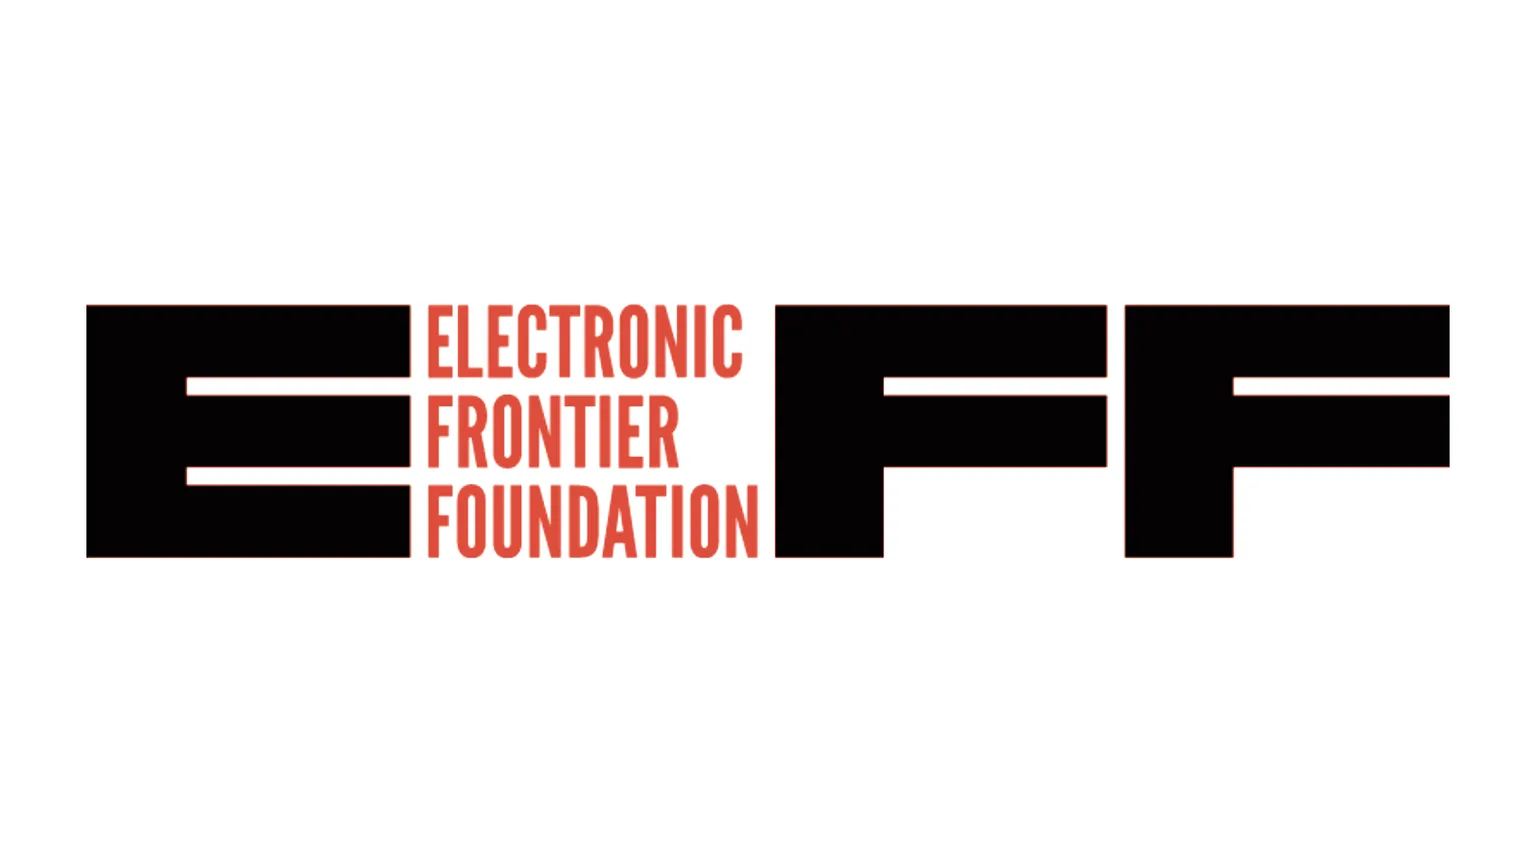 Image: Electronic Frontier Foundation